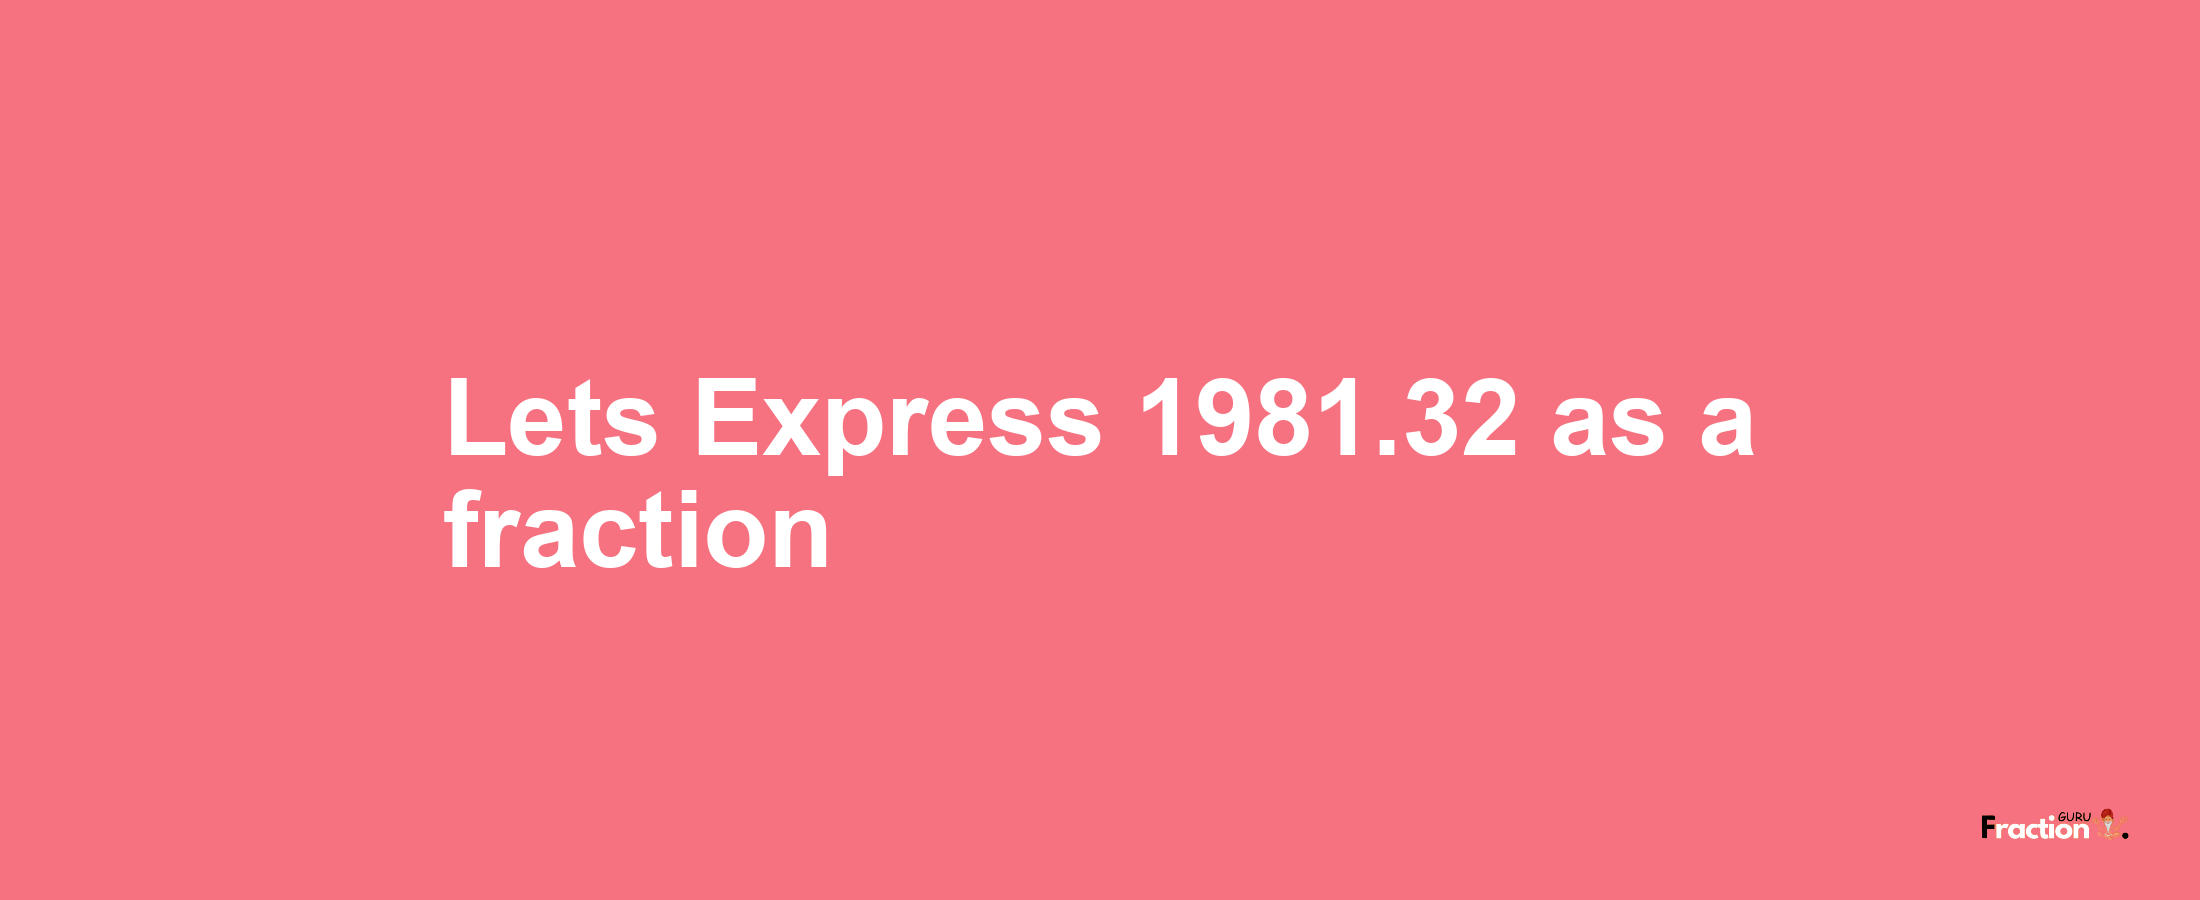 Lets Express 1981.32 as afraction